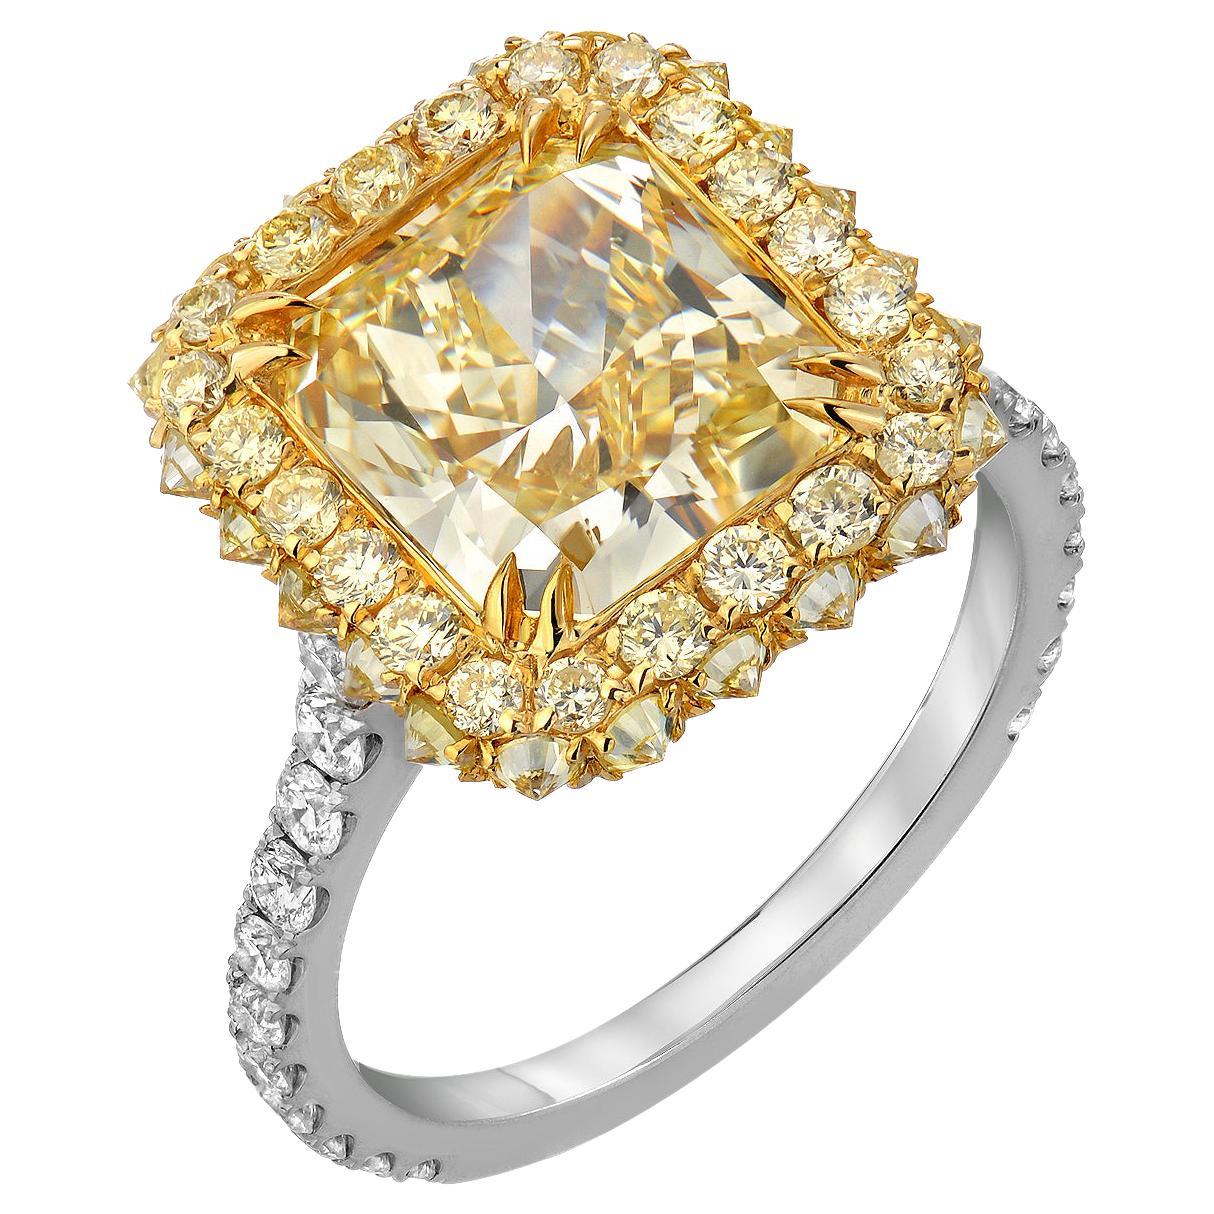 Fancy Light Yellow Diamond Ring 3.78 Carat Radiant Cut GIA Certified For Sale 7